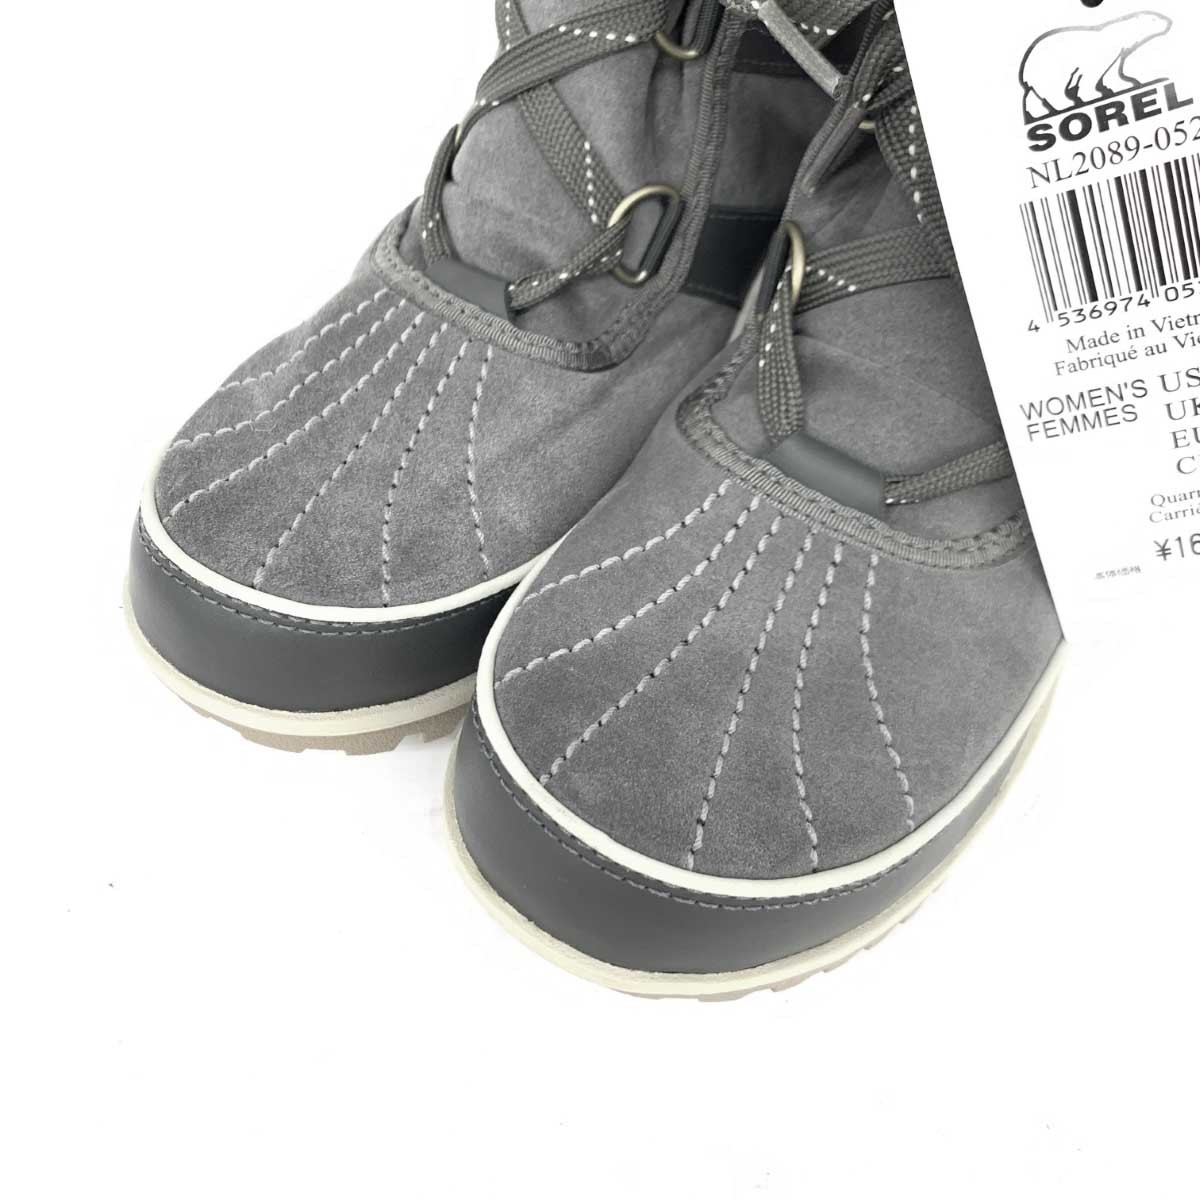  unused goods *SORELsorerutiboli2 short boots 25.5*1567 0310 52 gray suede inside boa lady's shoes shoes boots